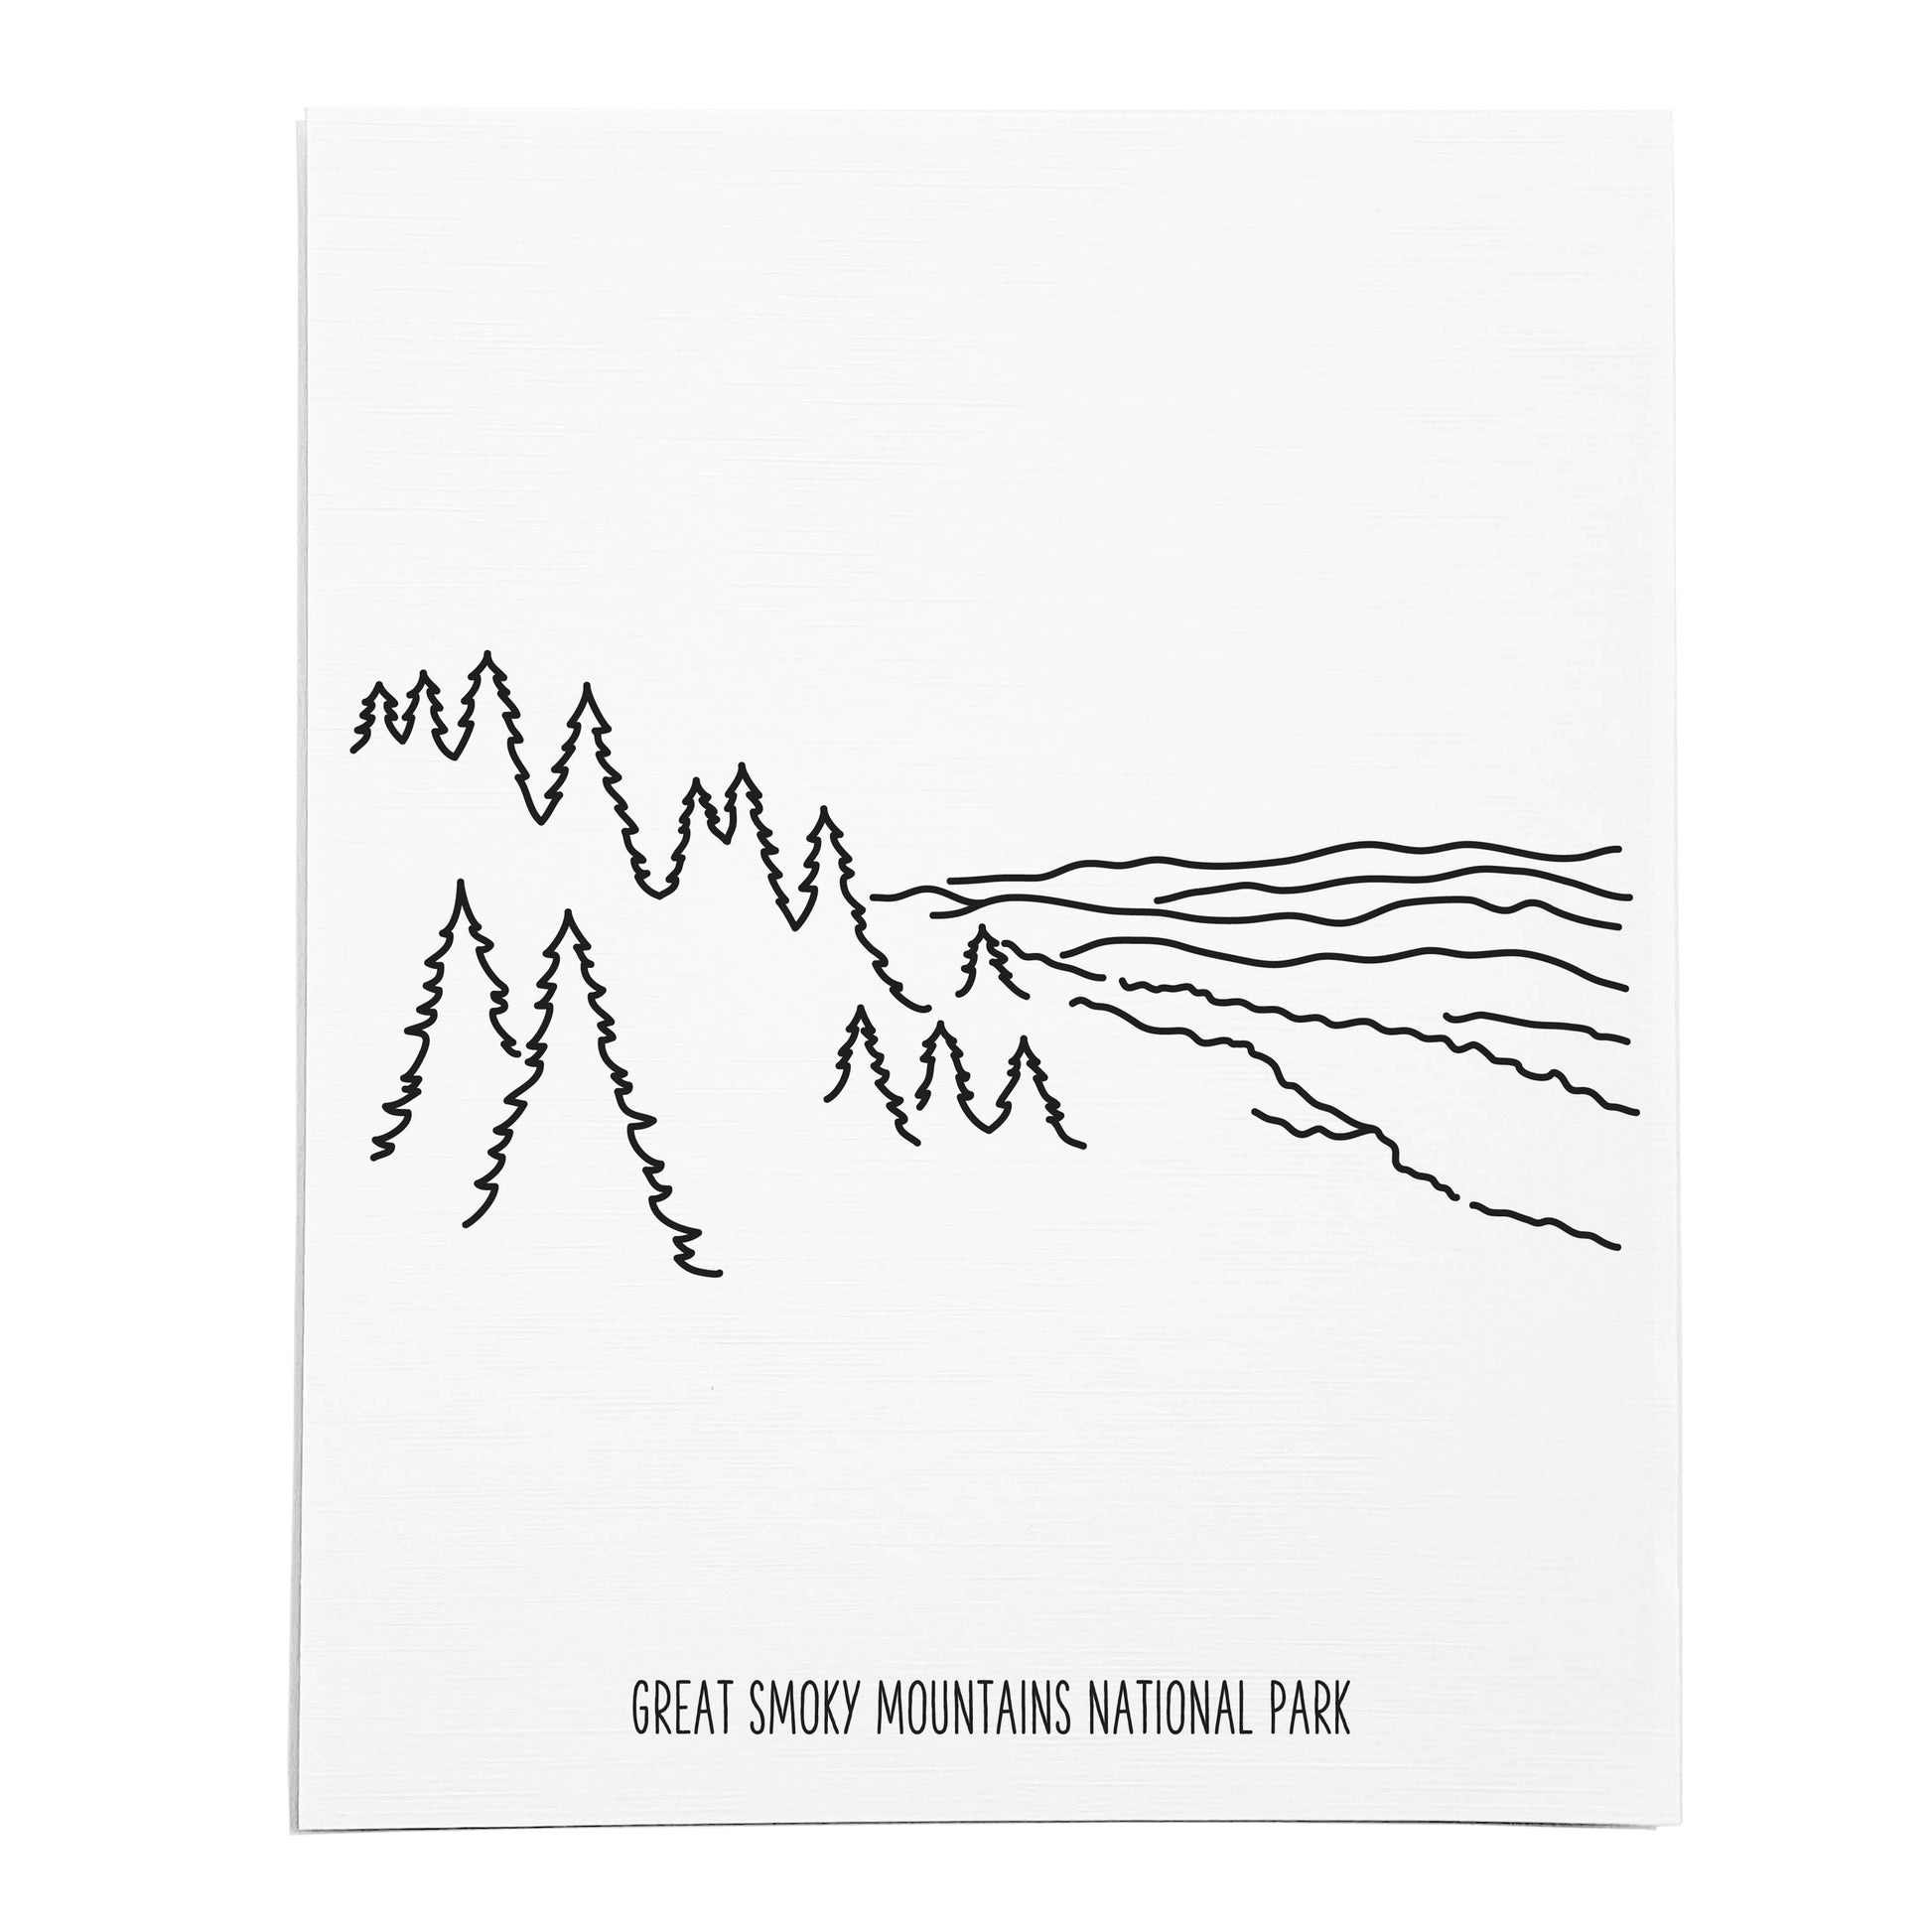 An art print featuring a line drawing of Great Smoky Mountains National Park on white linen paper